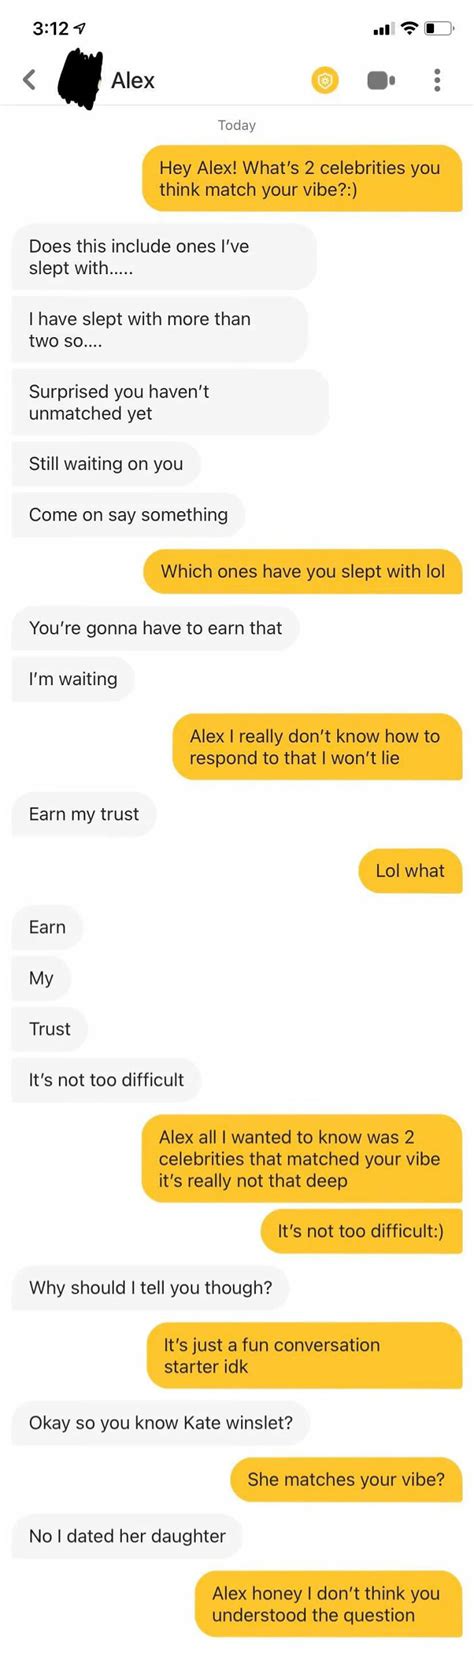 120 Times Bumble Conversations Were So Interesting People Had To Share Them In This Online Group